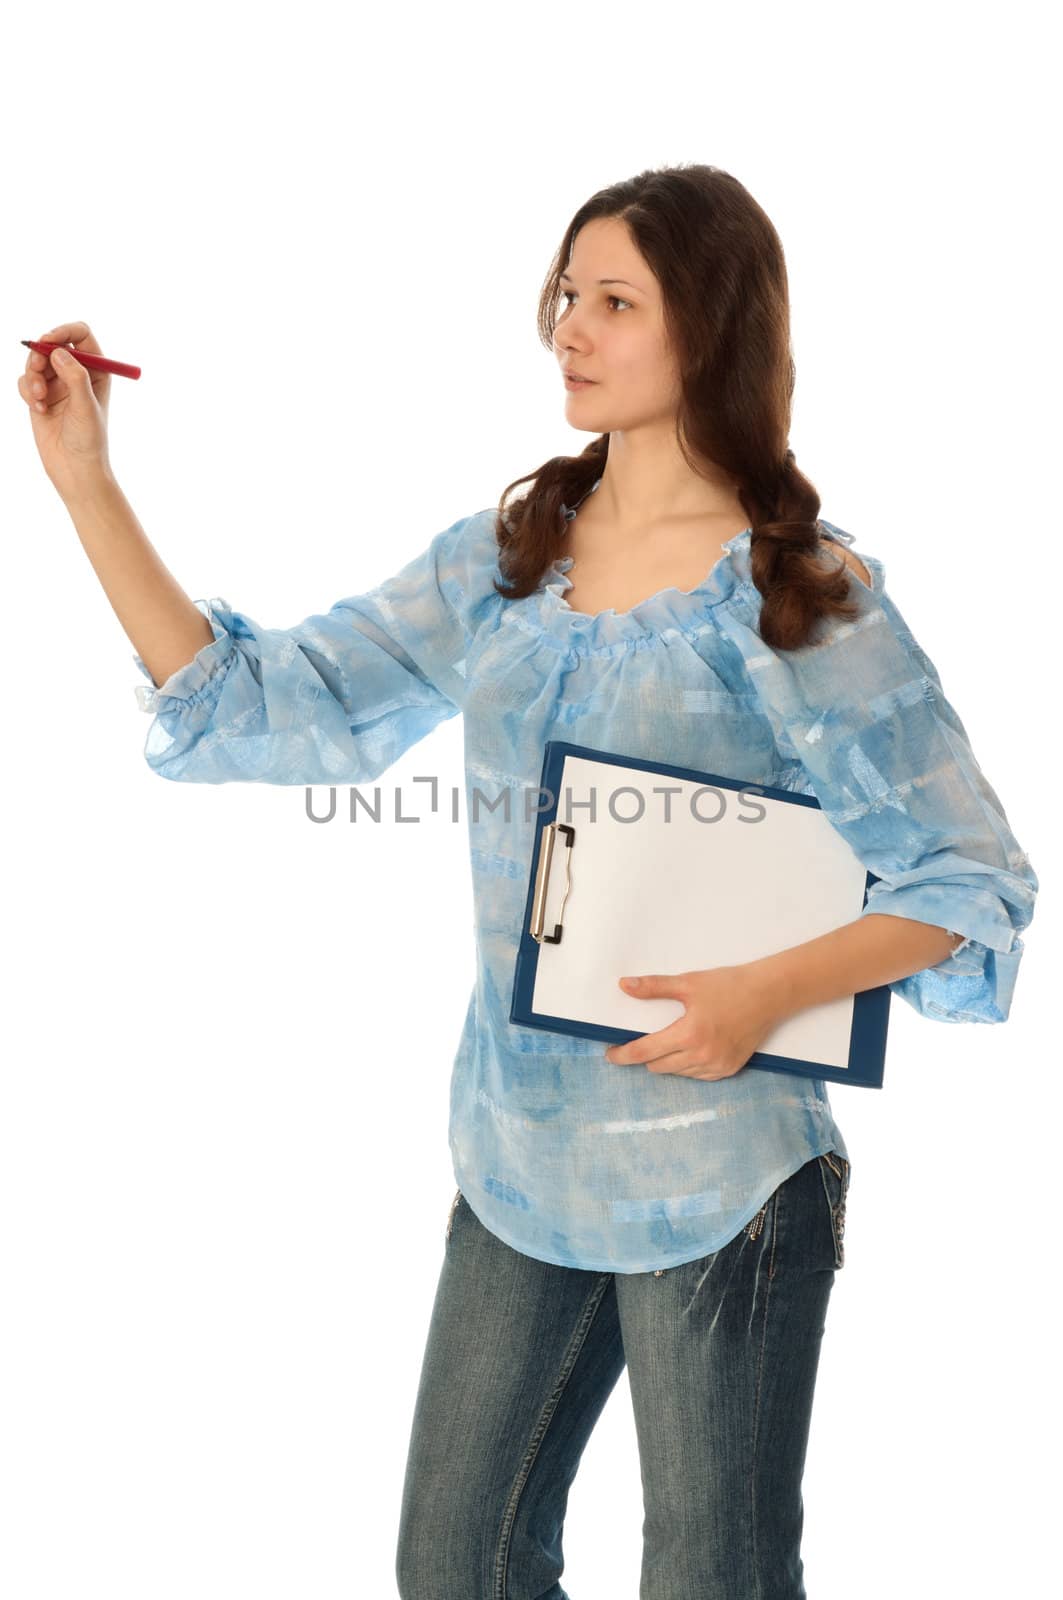 commodities expert with clipboard in the hand drawing a diagram